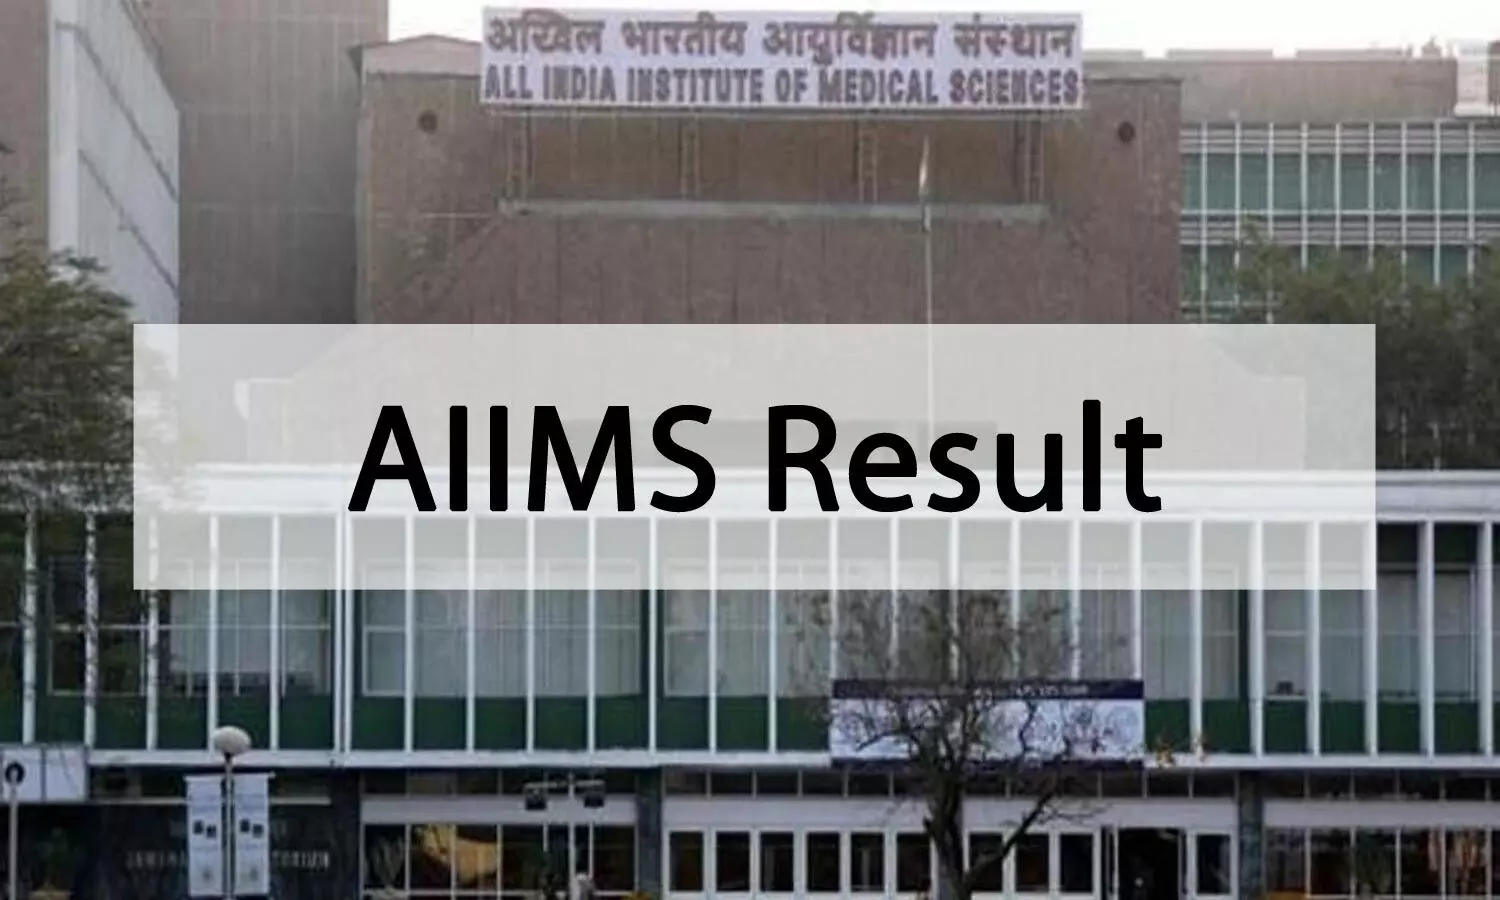 AIIMS releases result of MD, MS, MDS Professional exams June 2021